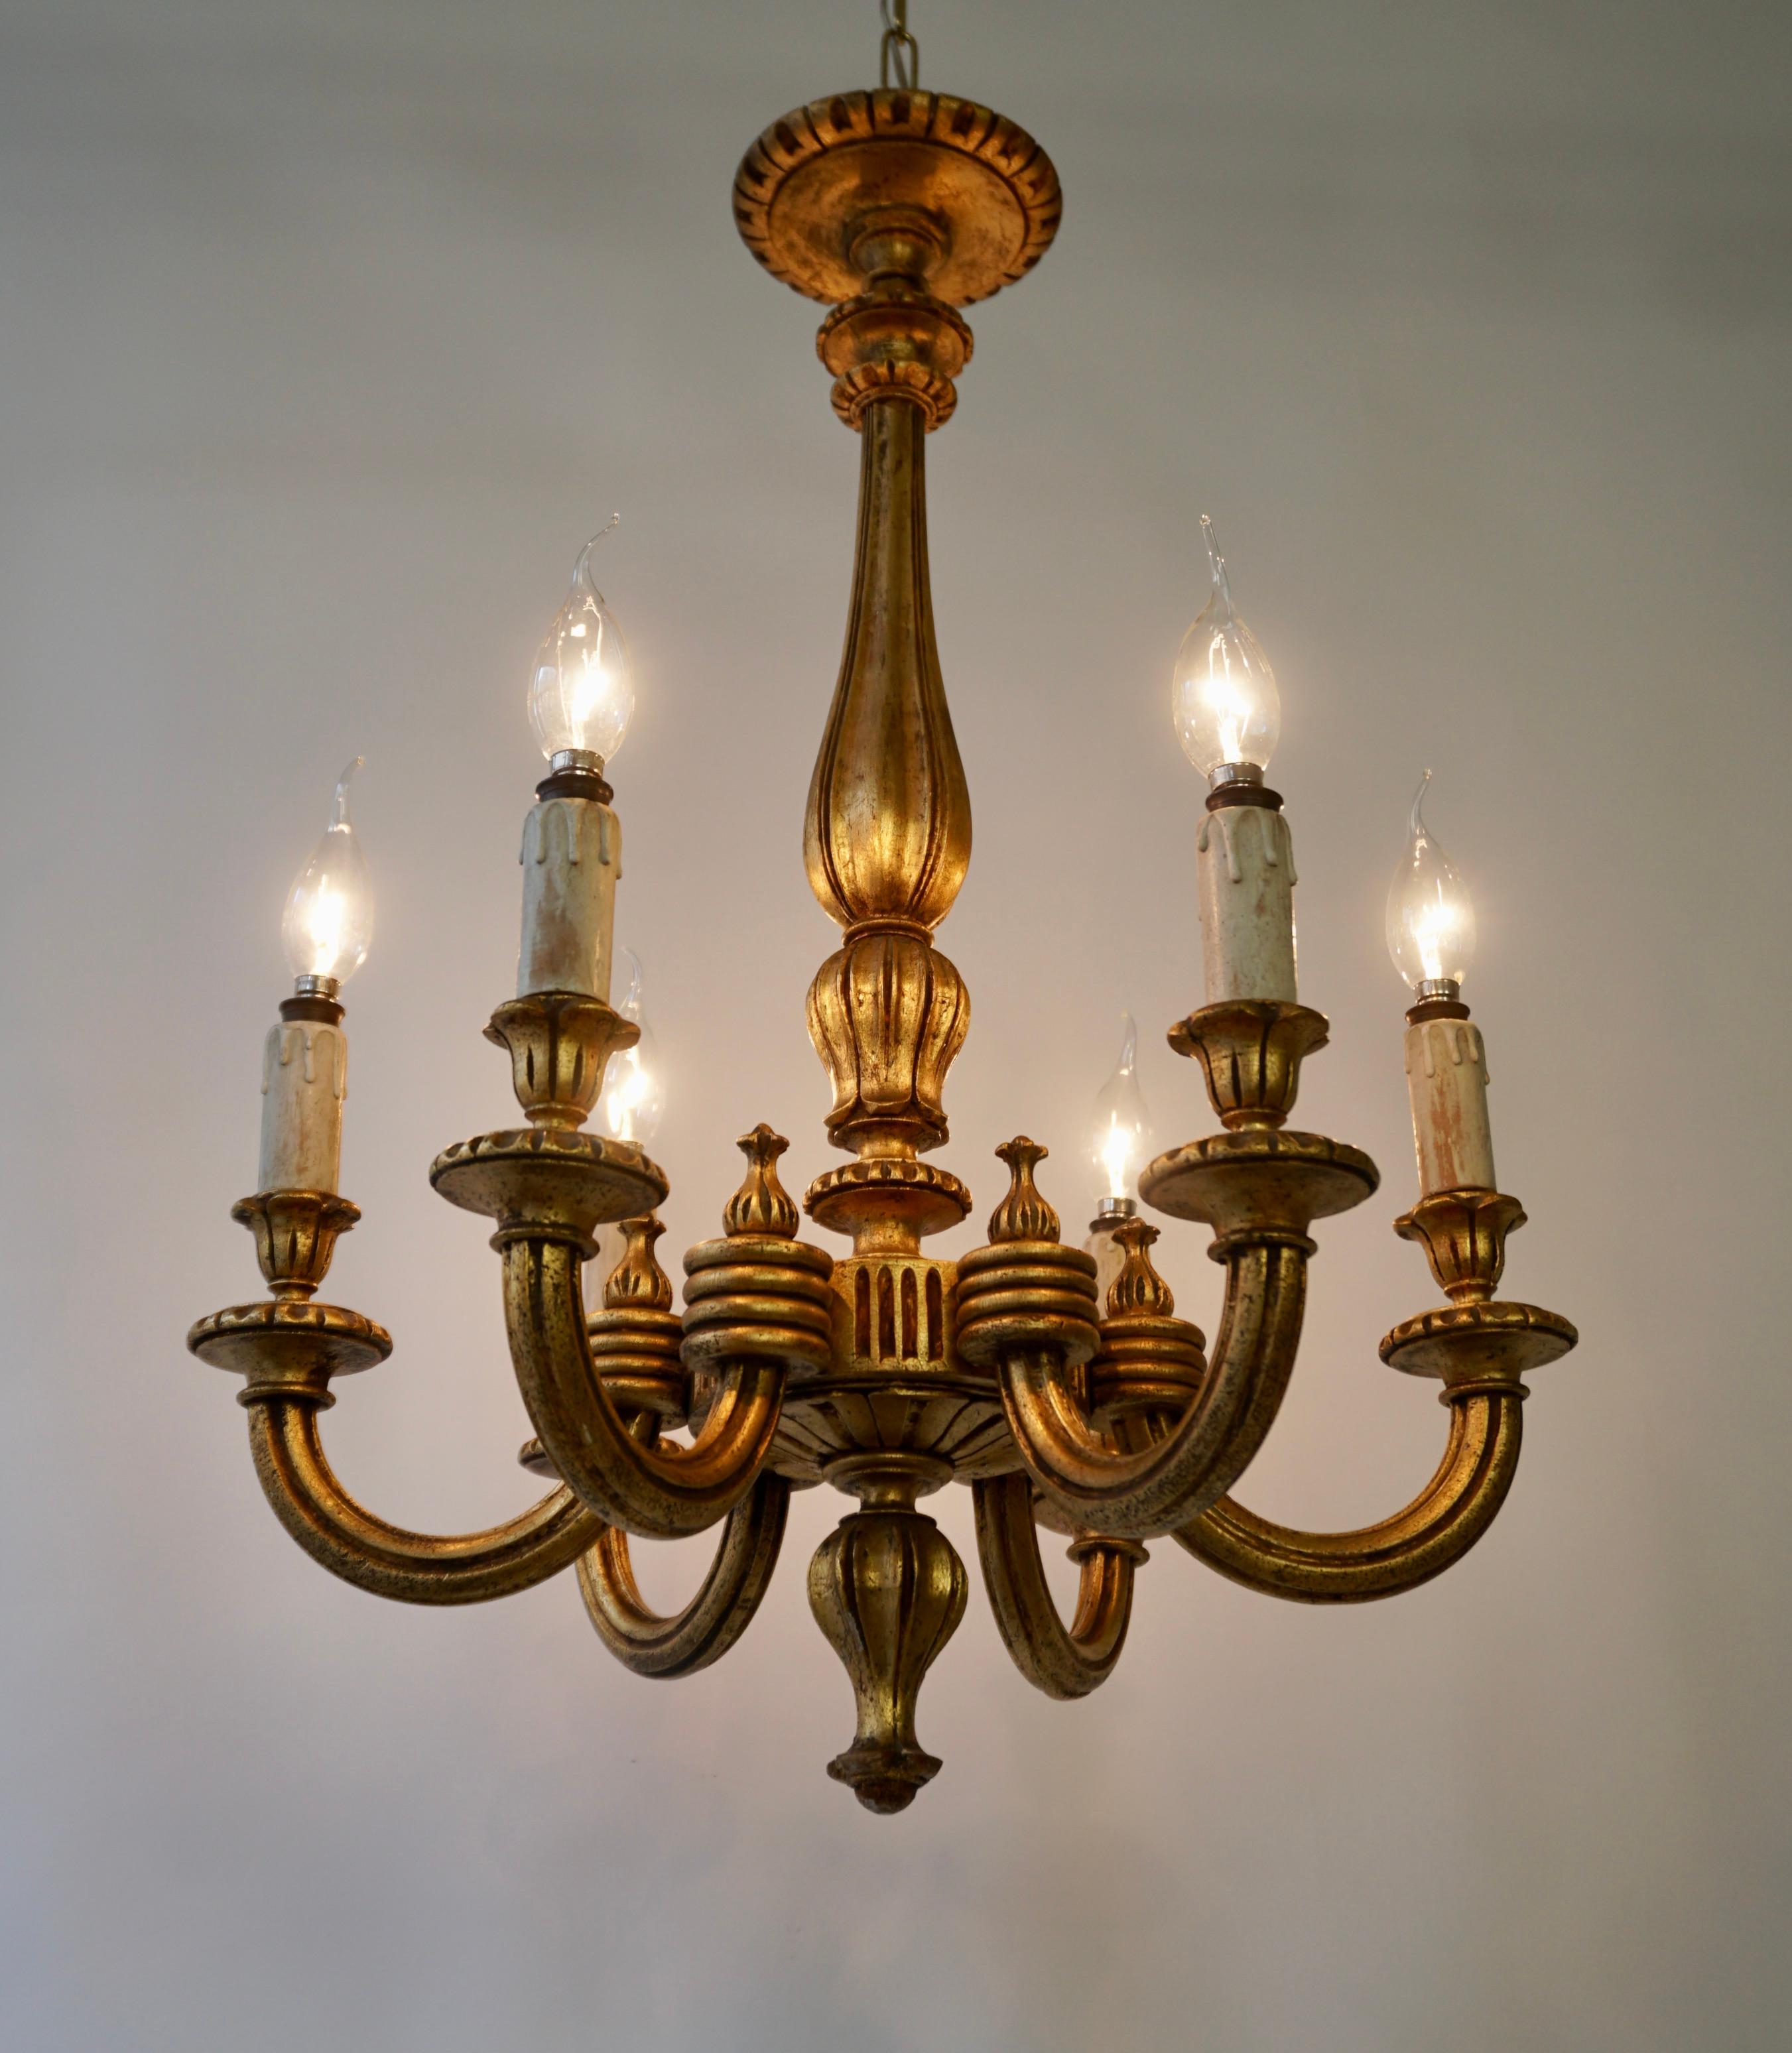 Monumental Italian giltwood chandelier. This stunning magnificent scale Italian gilt wood six light Baroque style chandelier from Tuscany has fabulous patina.
Measures: 28